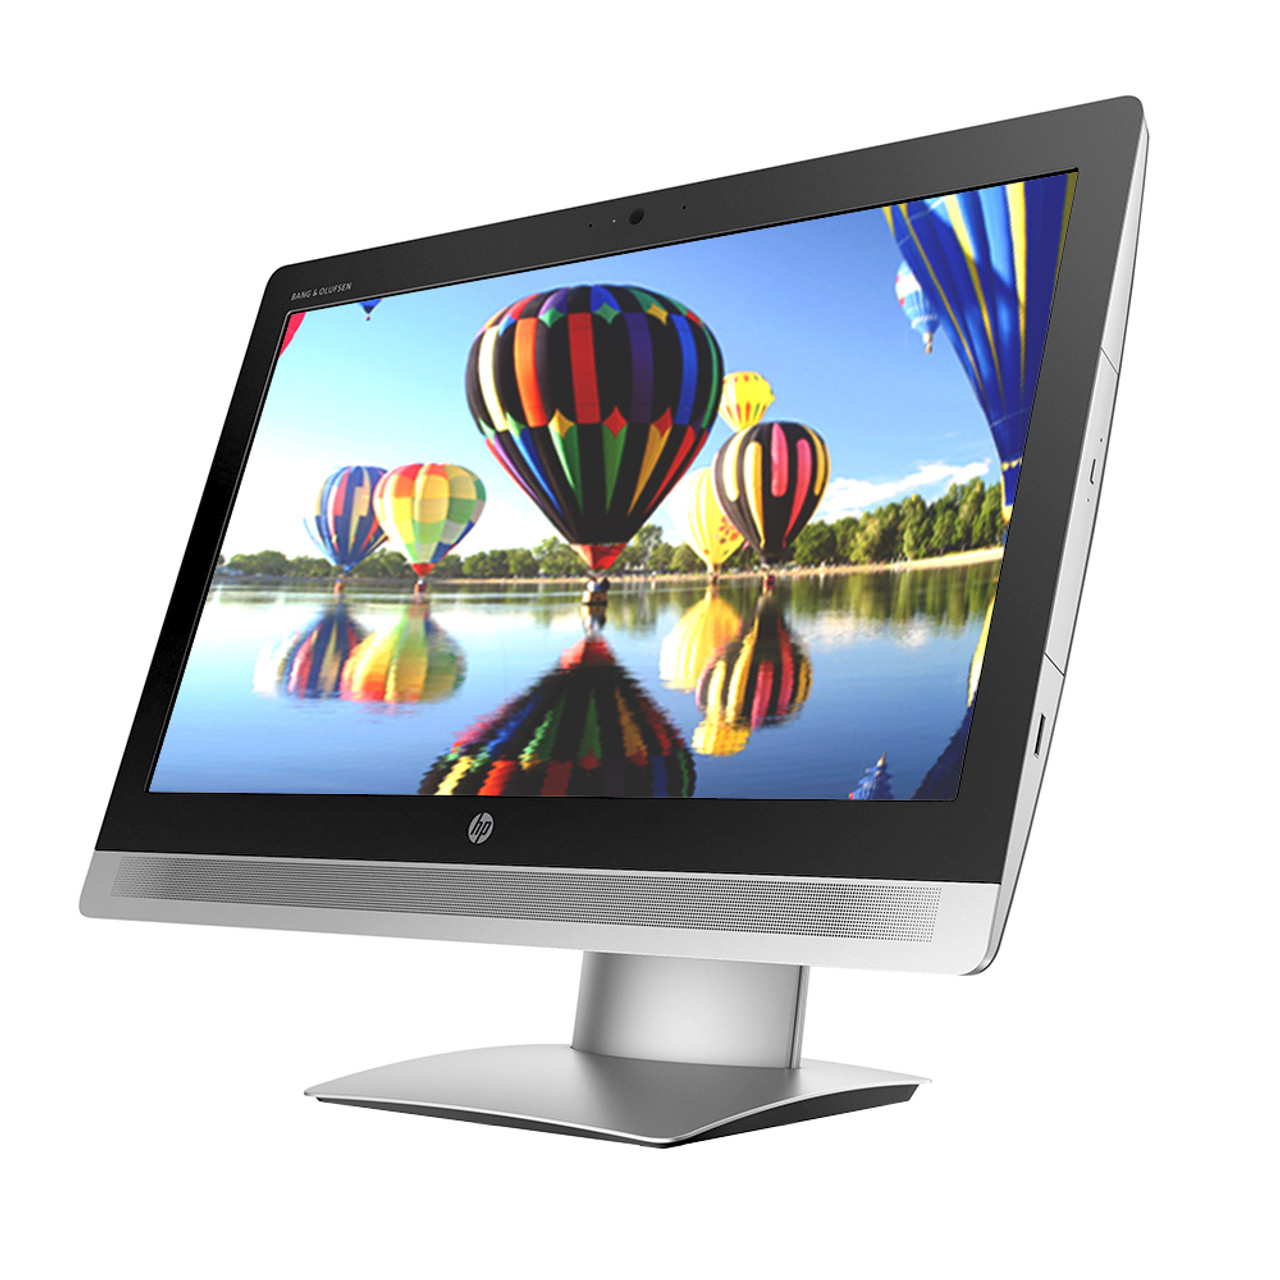 ProOne 600 G2 21.5-inch Non-Touch All-in-One PC (ENERGY STAR)